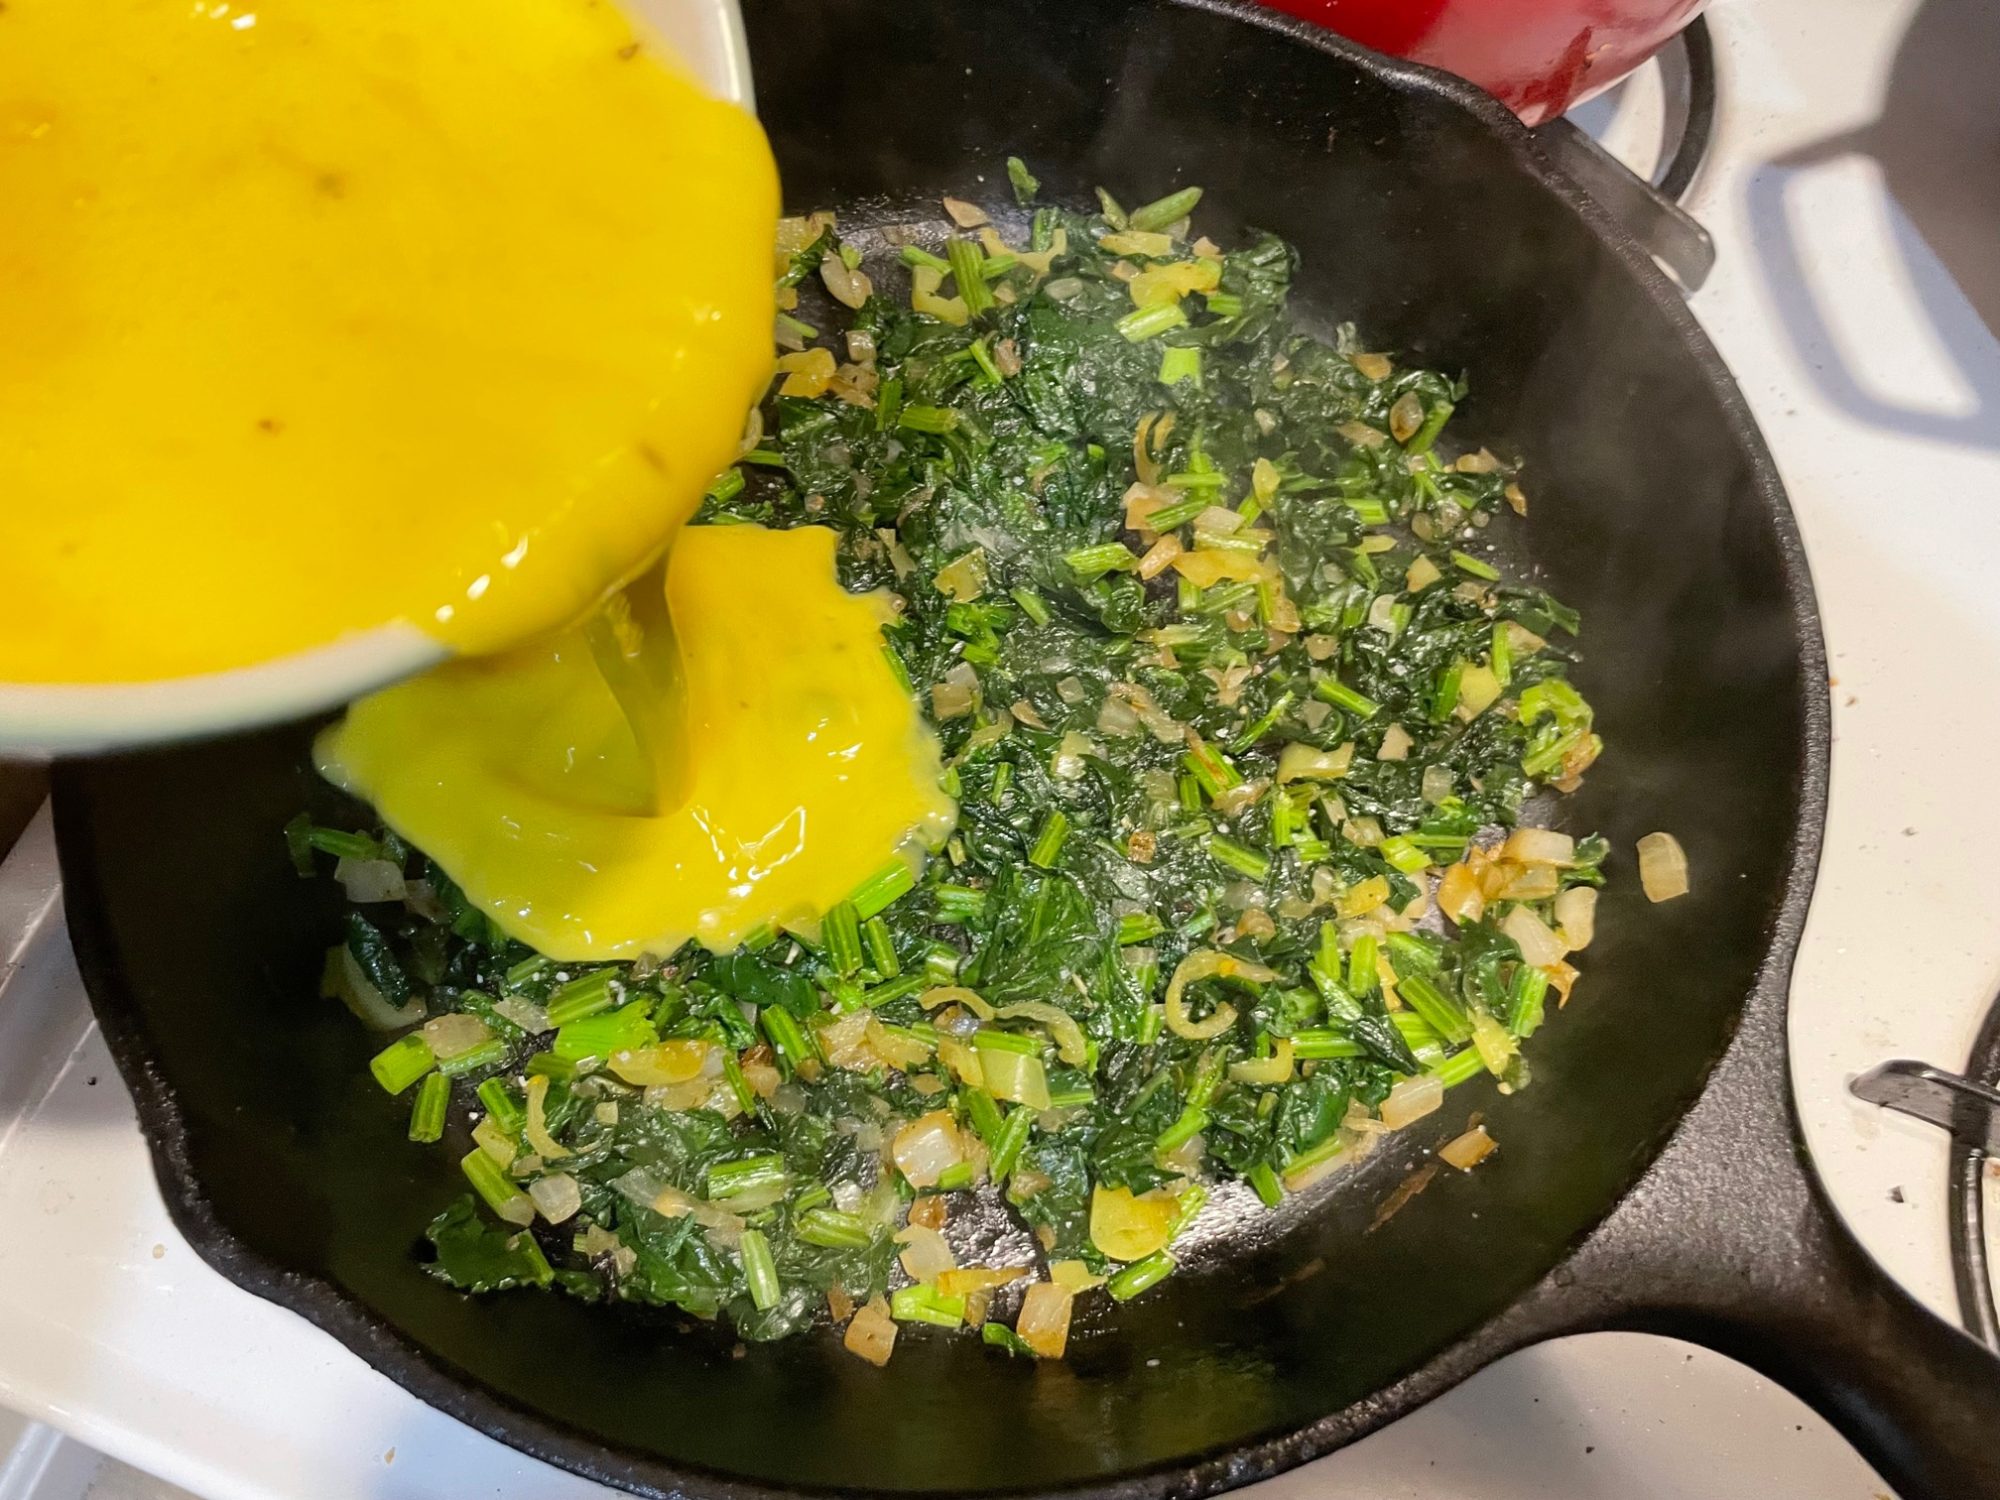 Adding eggs to the spinach mix in the pan before scrambling